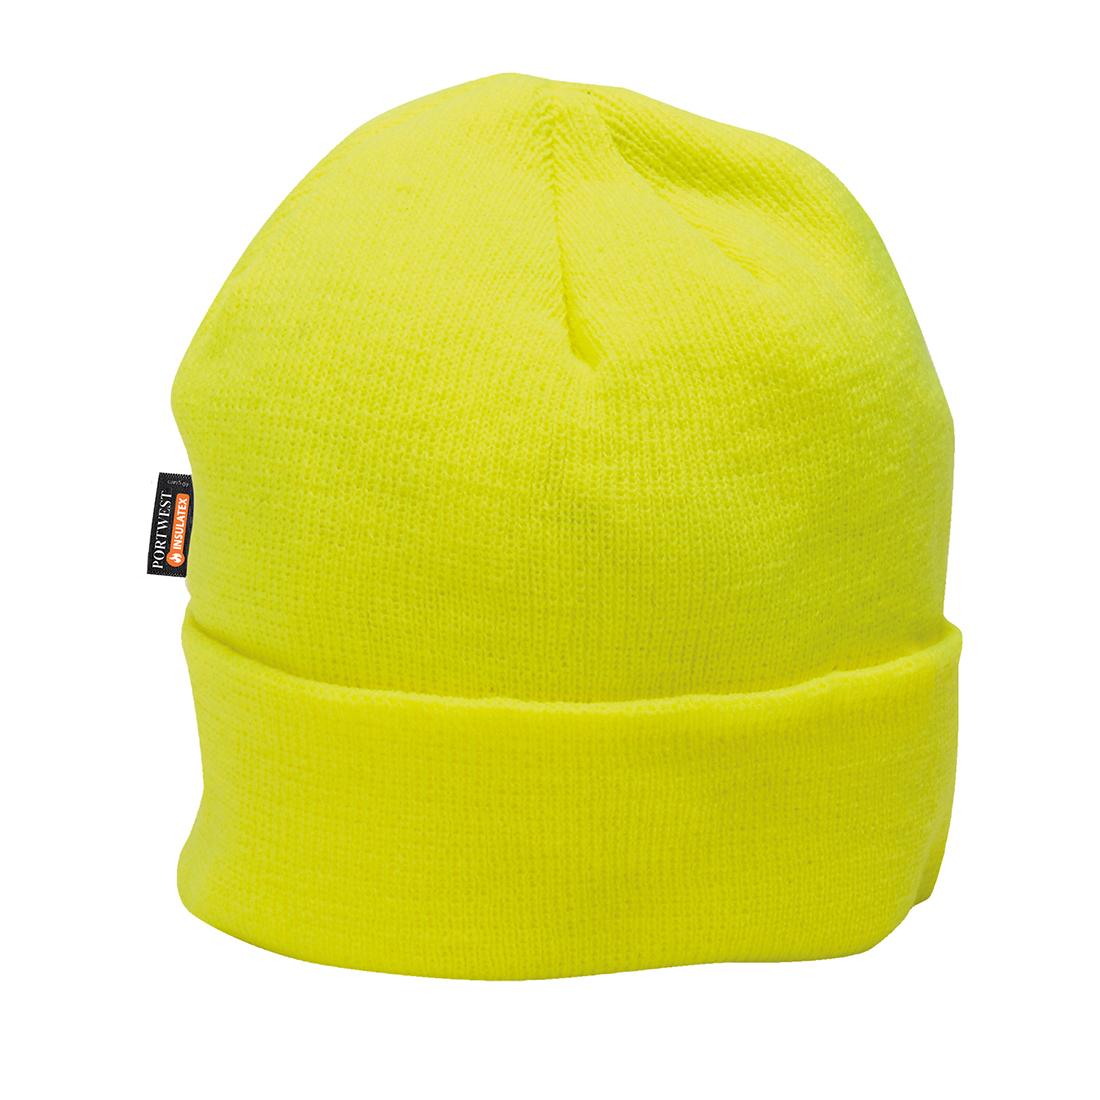 Knit Cap Insulatex Lined Size  Yellow